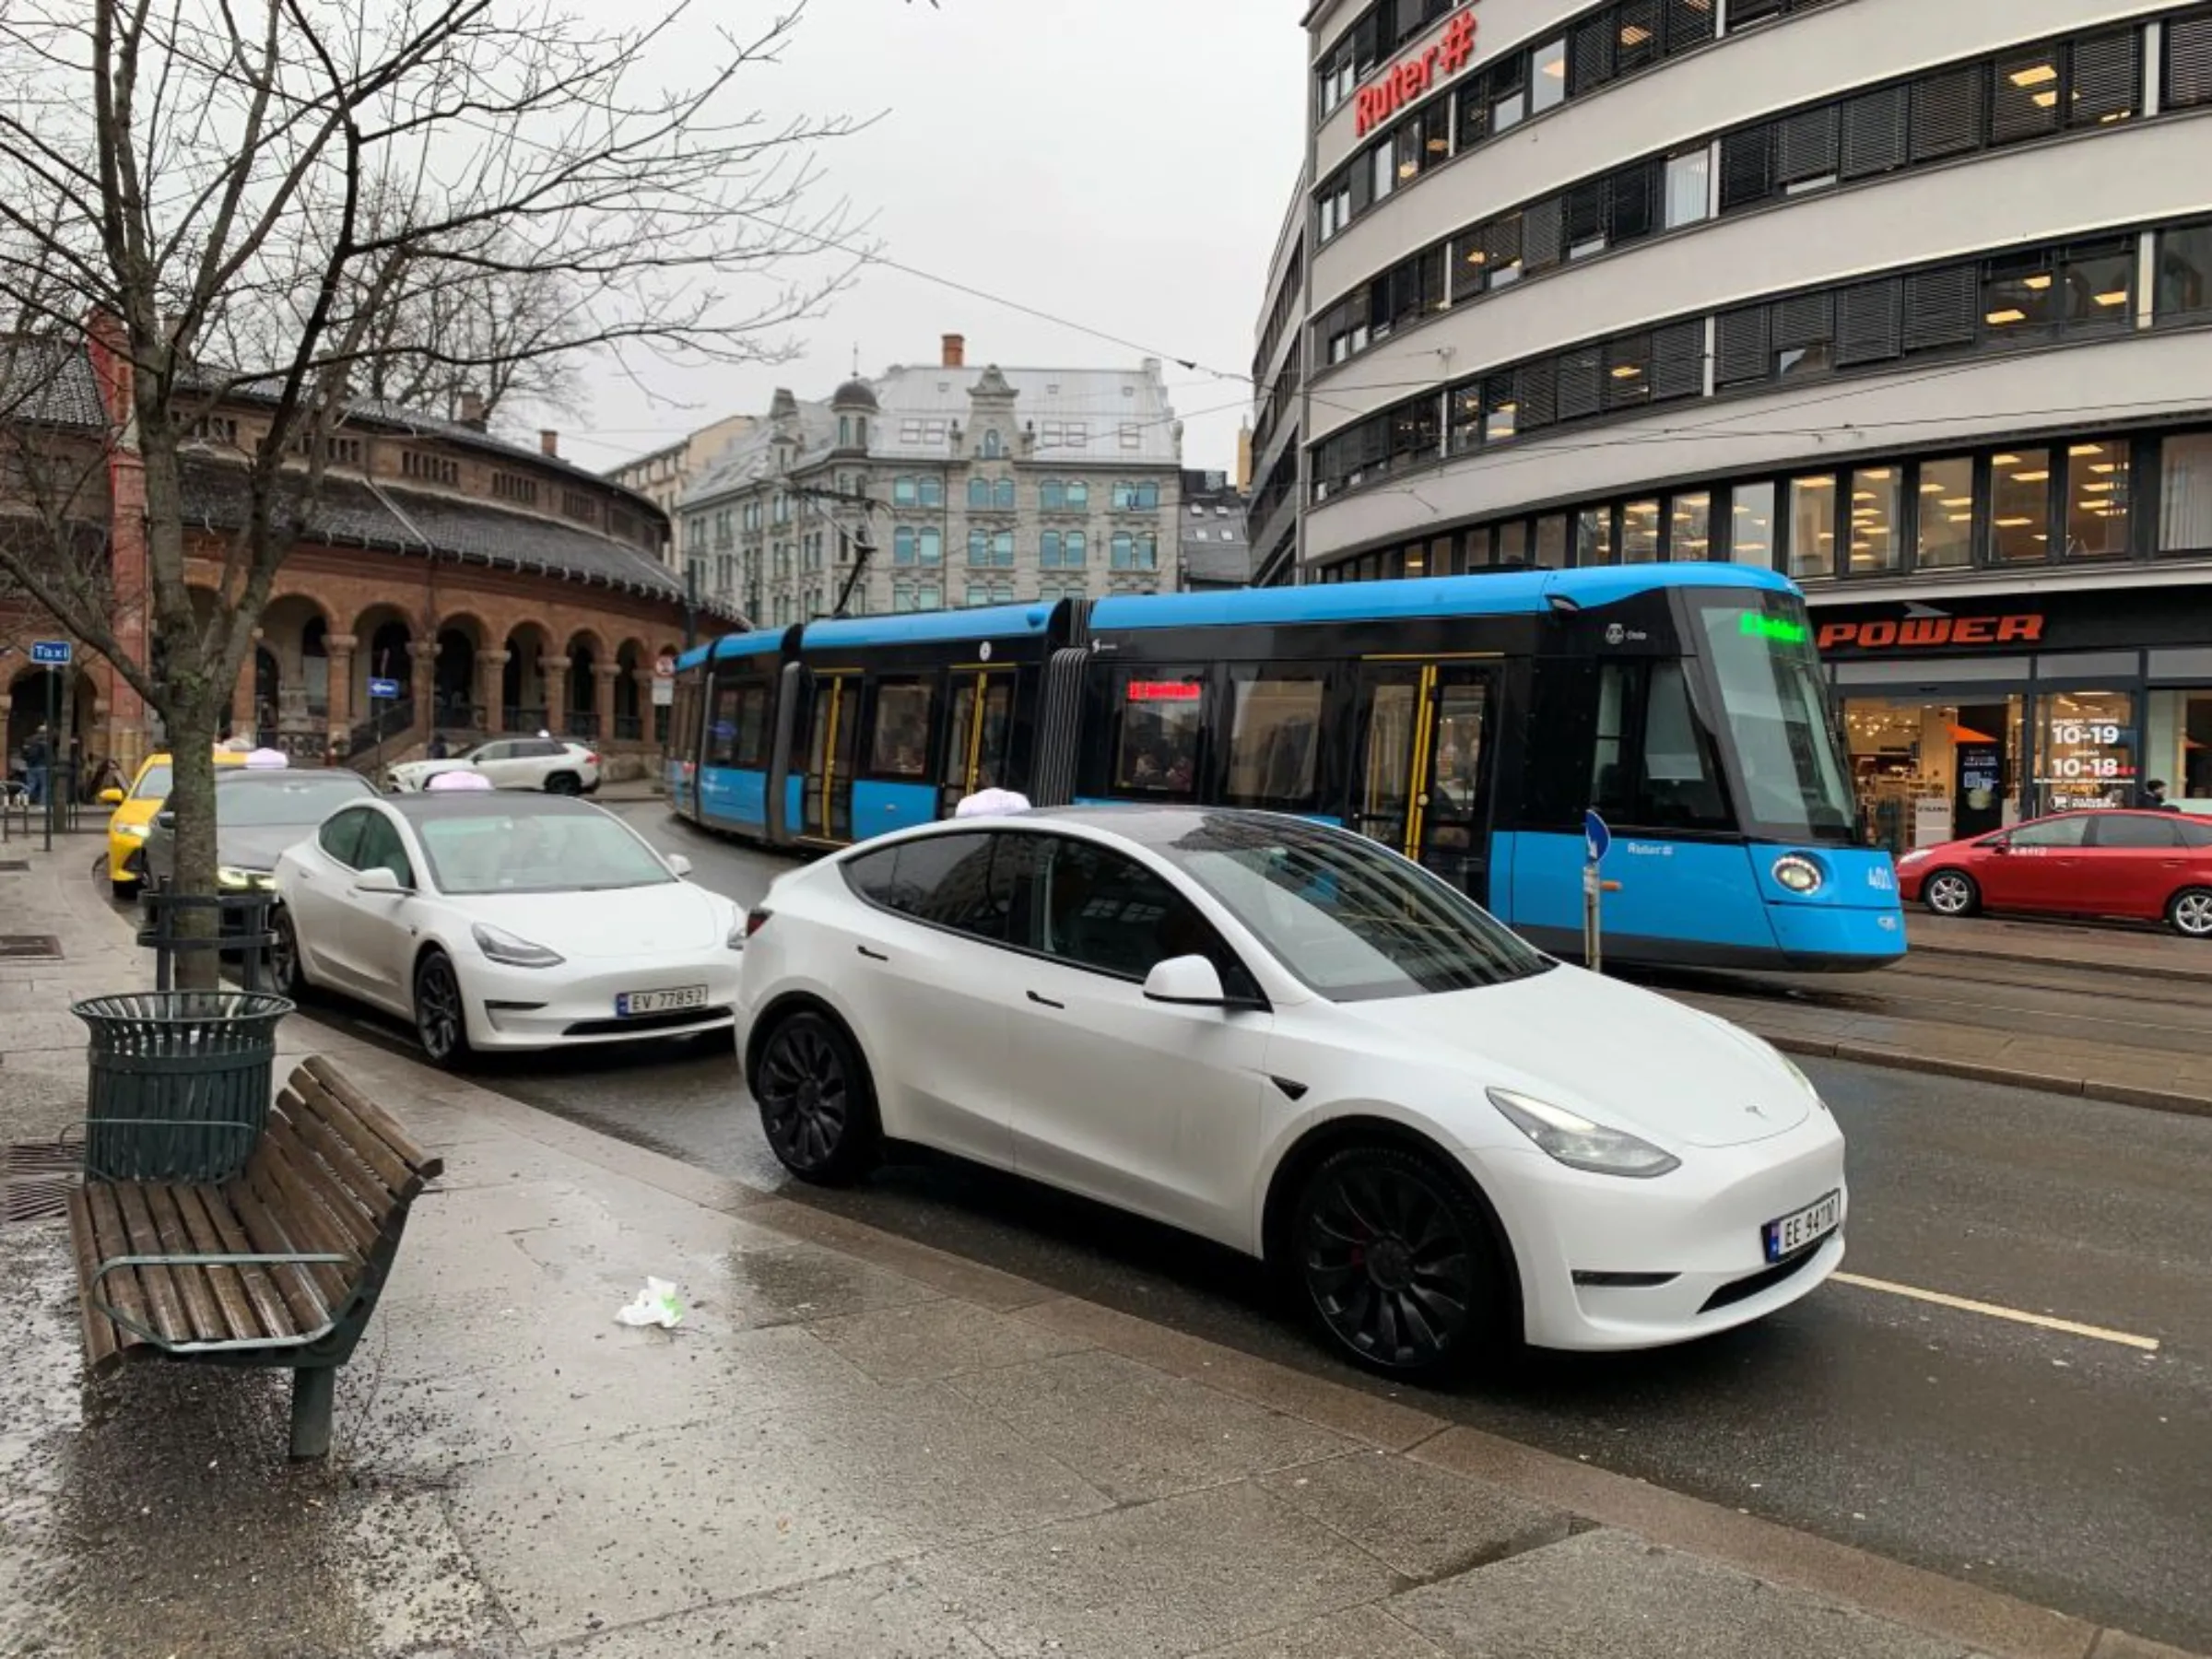 An electric tram passes electric taxis waiting for clients in central Oslo, March 24, 2023. Oslo is set this year to become the world’s first capital city with only electric public transport